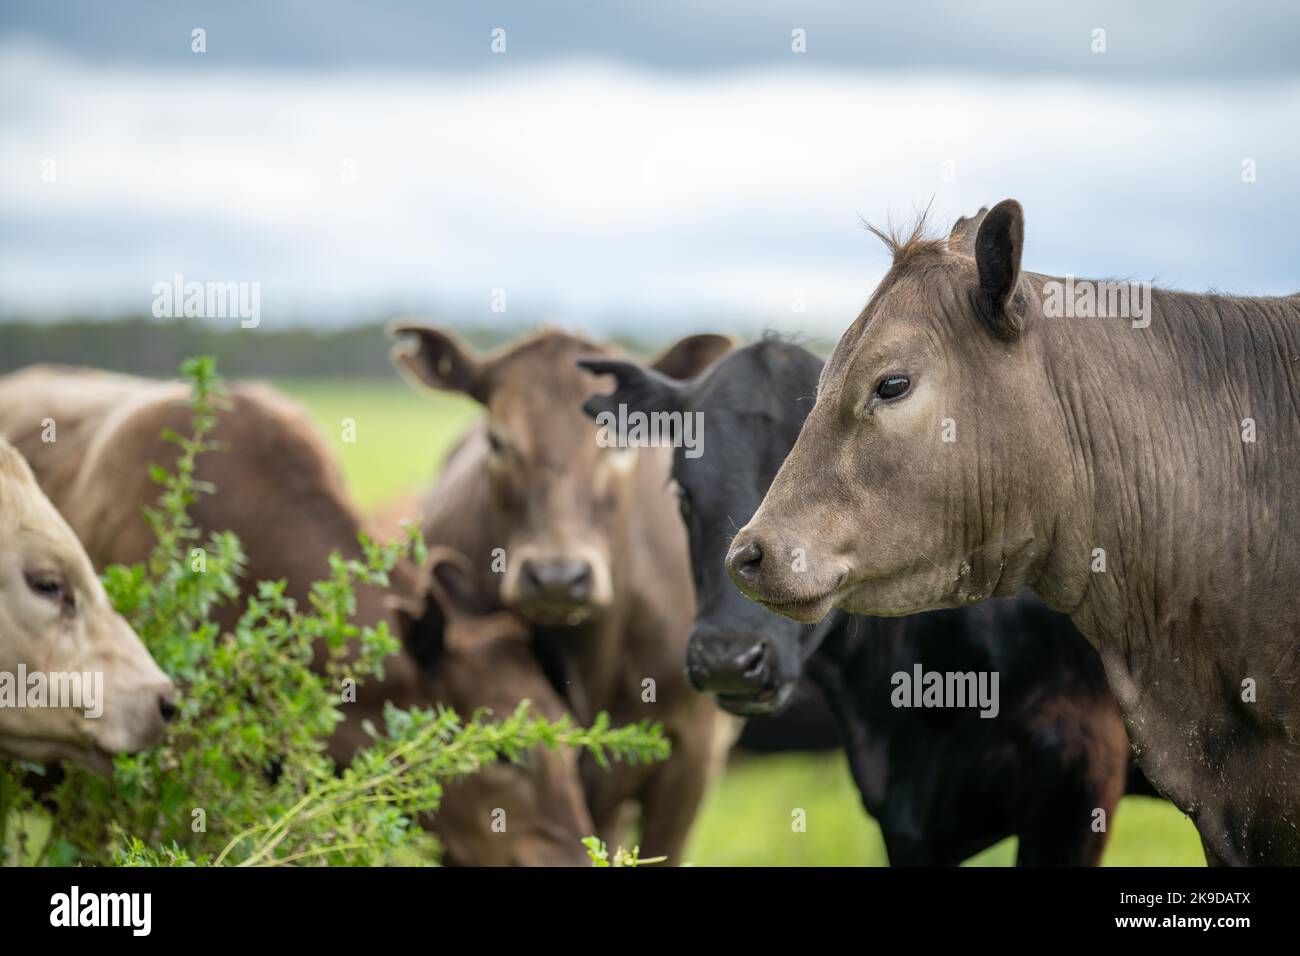 lose up of Stud Beef bulls, cows and calves grazing on grass in a field, in Australia. breeds of cattle include speckle park, murray grey, angus, bran Stock Photo